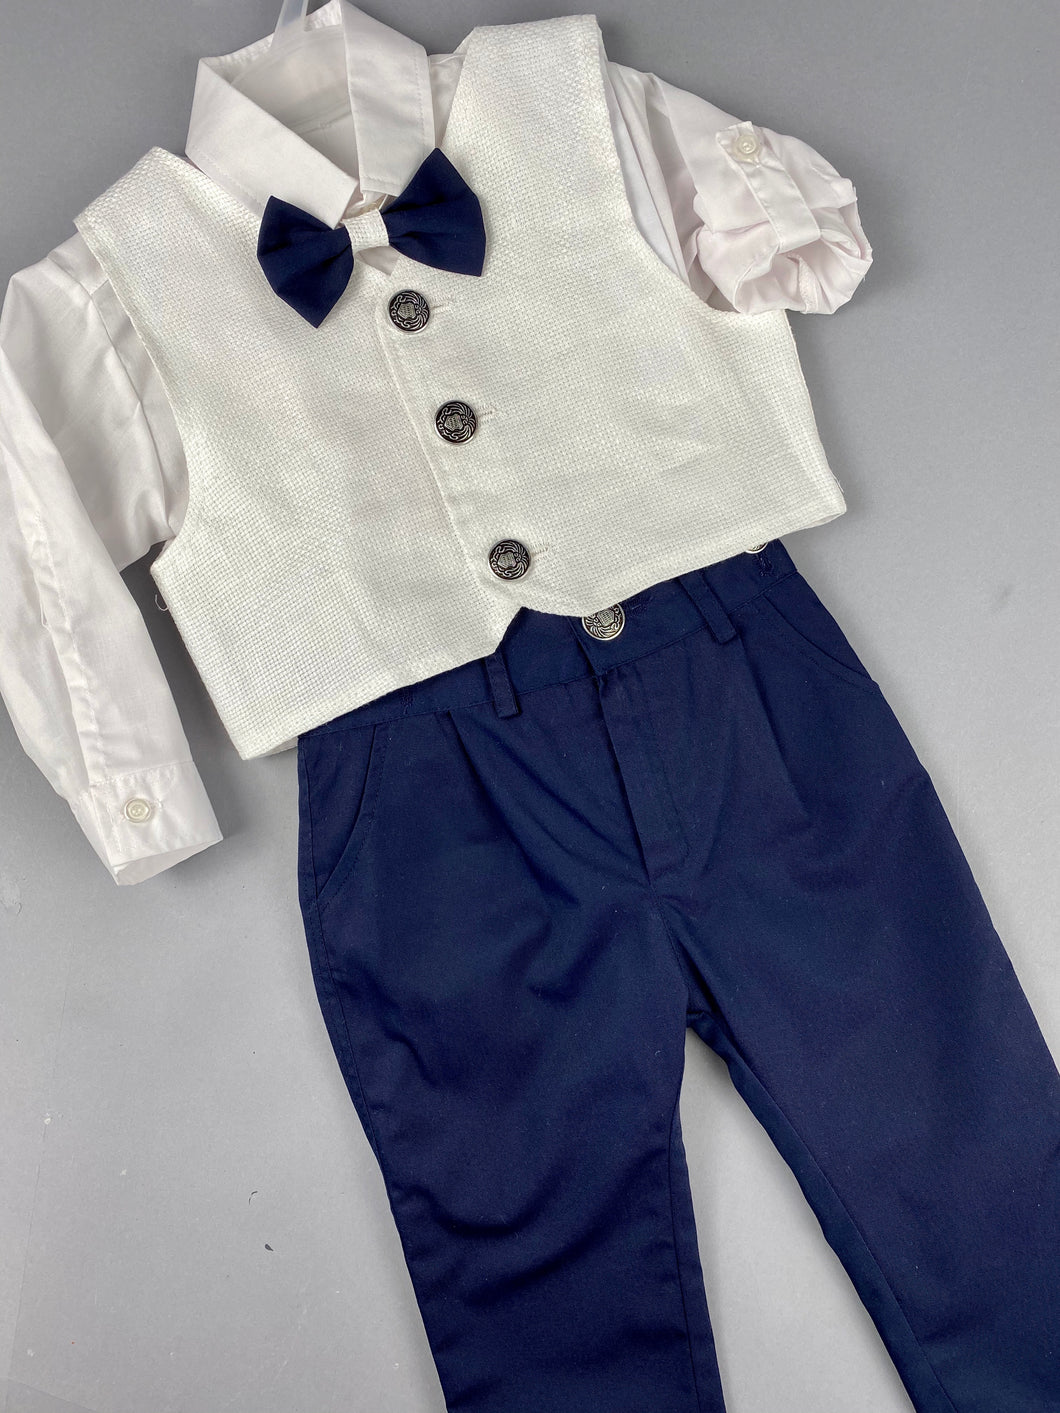 Rosies Collections 7pc full suit, Dress shirt with cuff sleeves, Navy Blue Pants, White Jacket, Belt or Suspenders, Cap. Made in Greece exclusively for Rosies Collections S20194